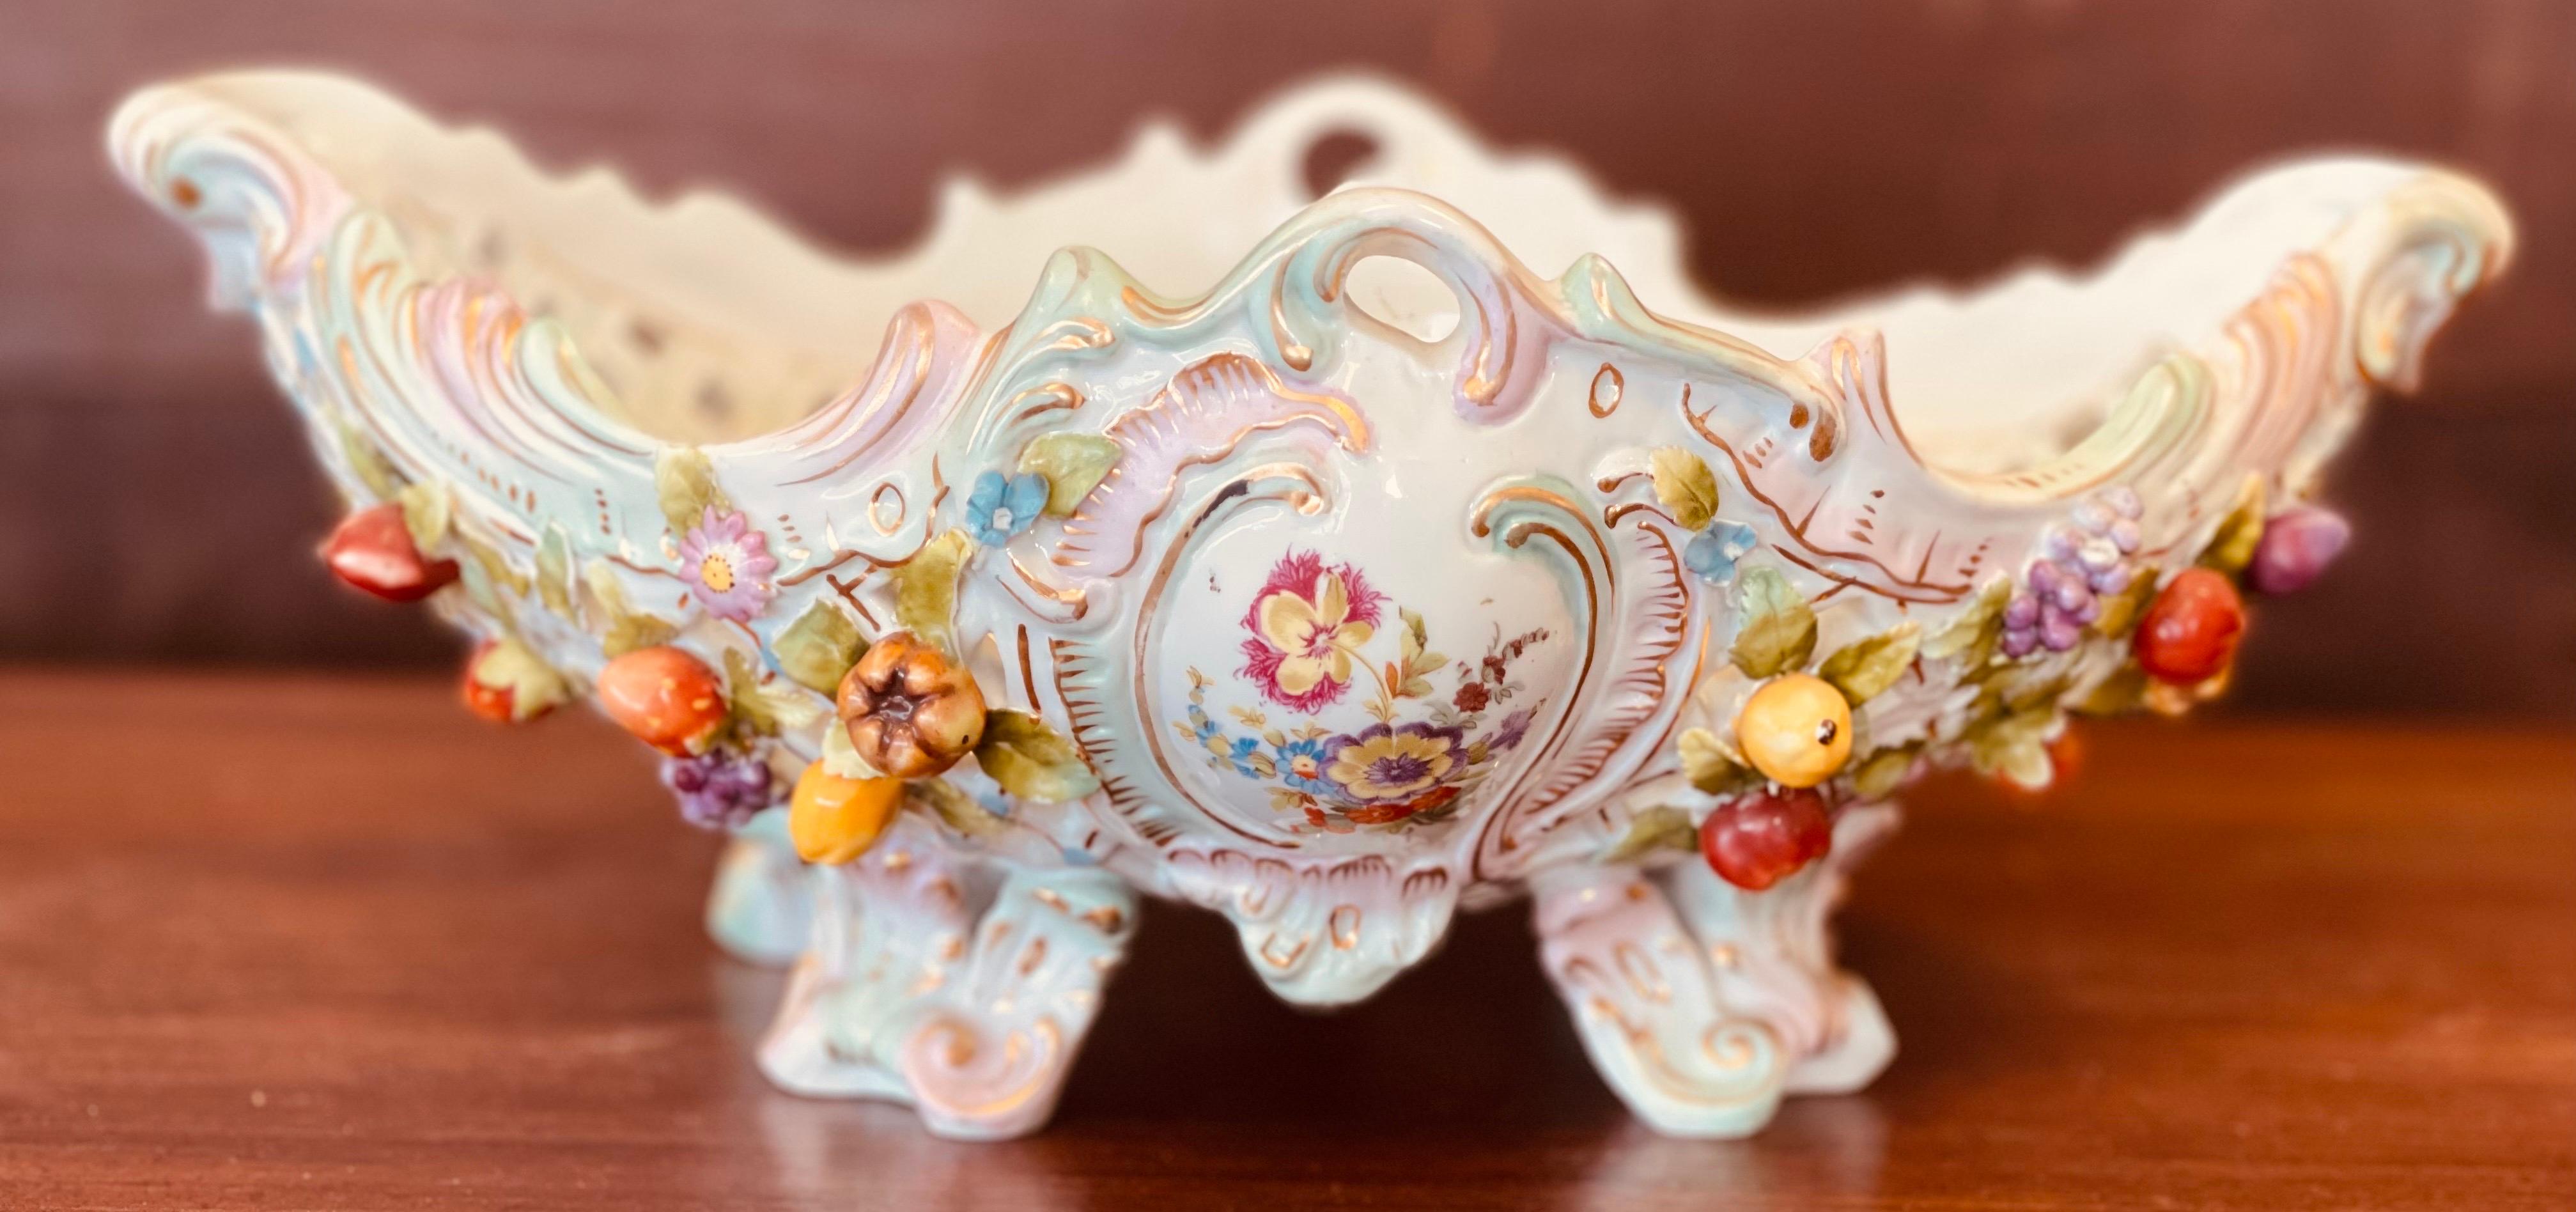 Antique Large Pierced German Centerpiece Bowl w/Raised Flowers Meissen or Like In Good Condition For Sale In West Hartford, CT